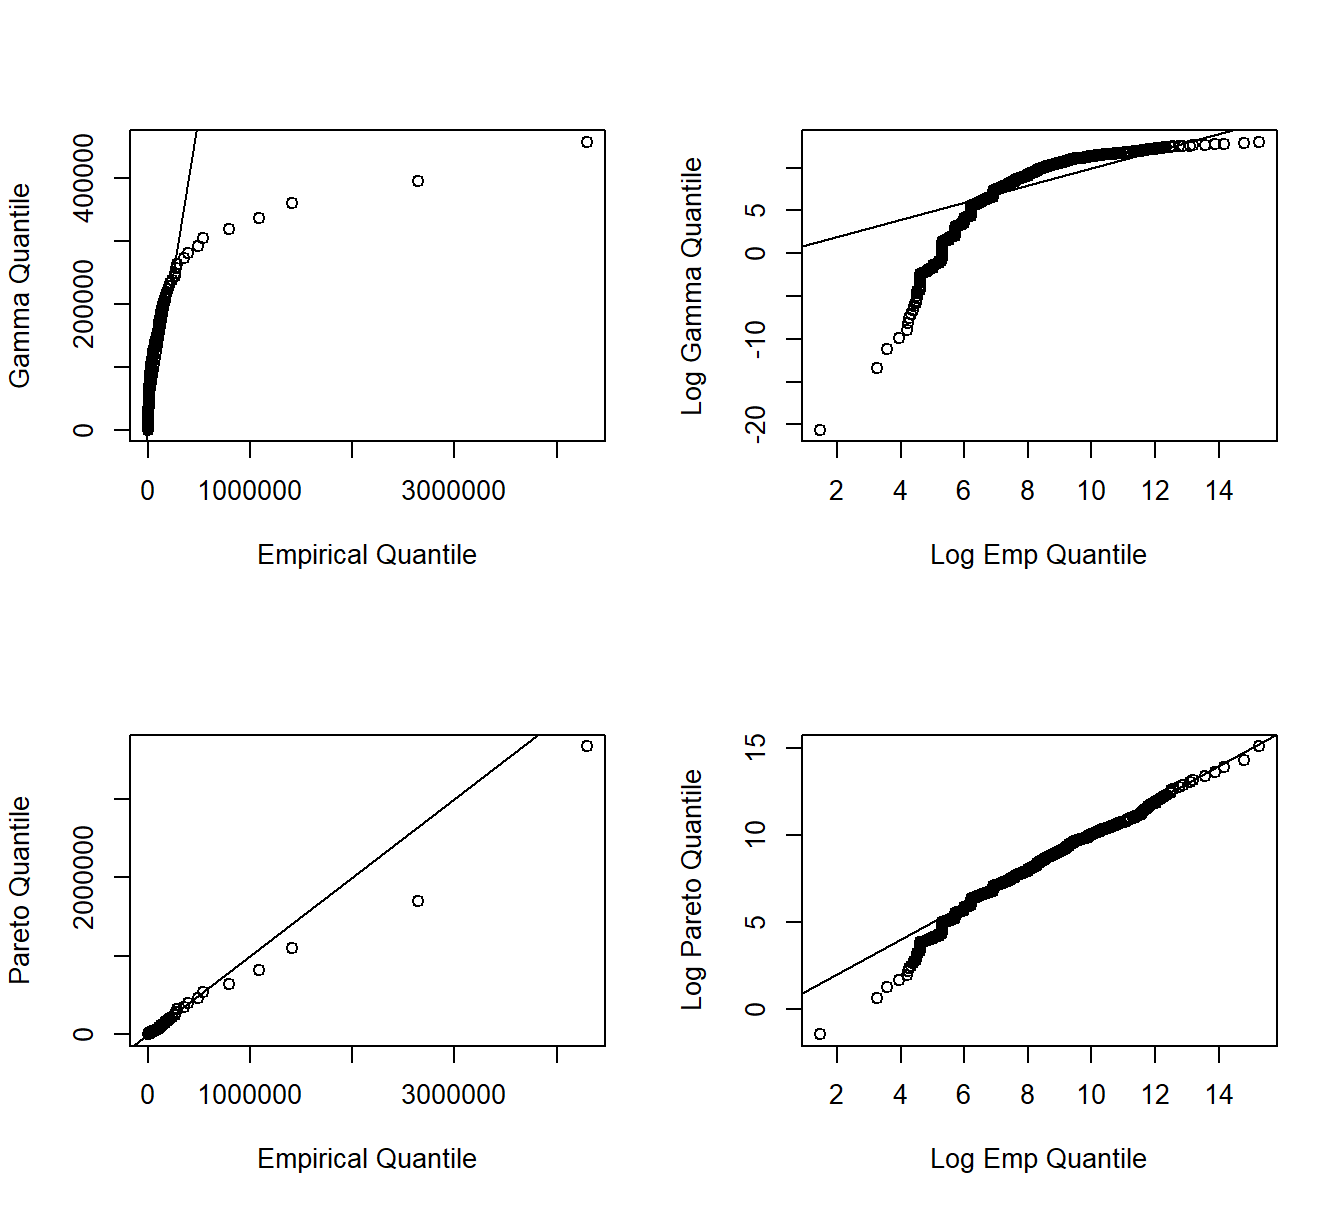 Quantile-Quantile (\(qq\)) Plots. The horizontal axis gives the empirical quantiles at each observation. The right-hand panels they are graphed on a logarithmic basis. The vertical axis gives the quantiles from the fitted distributions; gamma quantiles are in the upper panels, Pareto quantiles are in the lower panels.